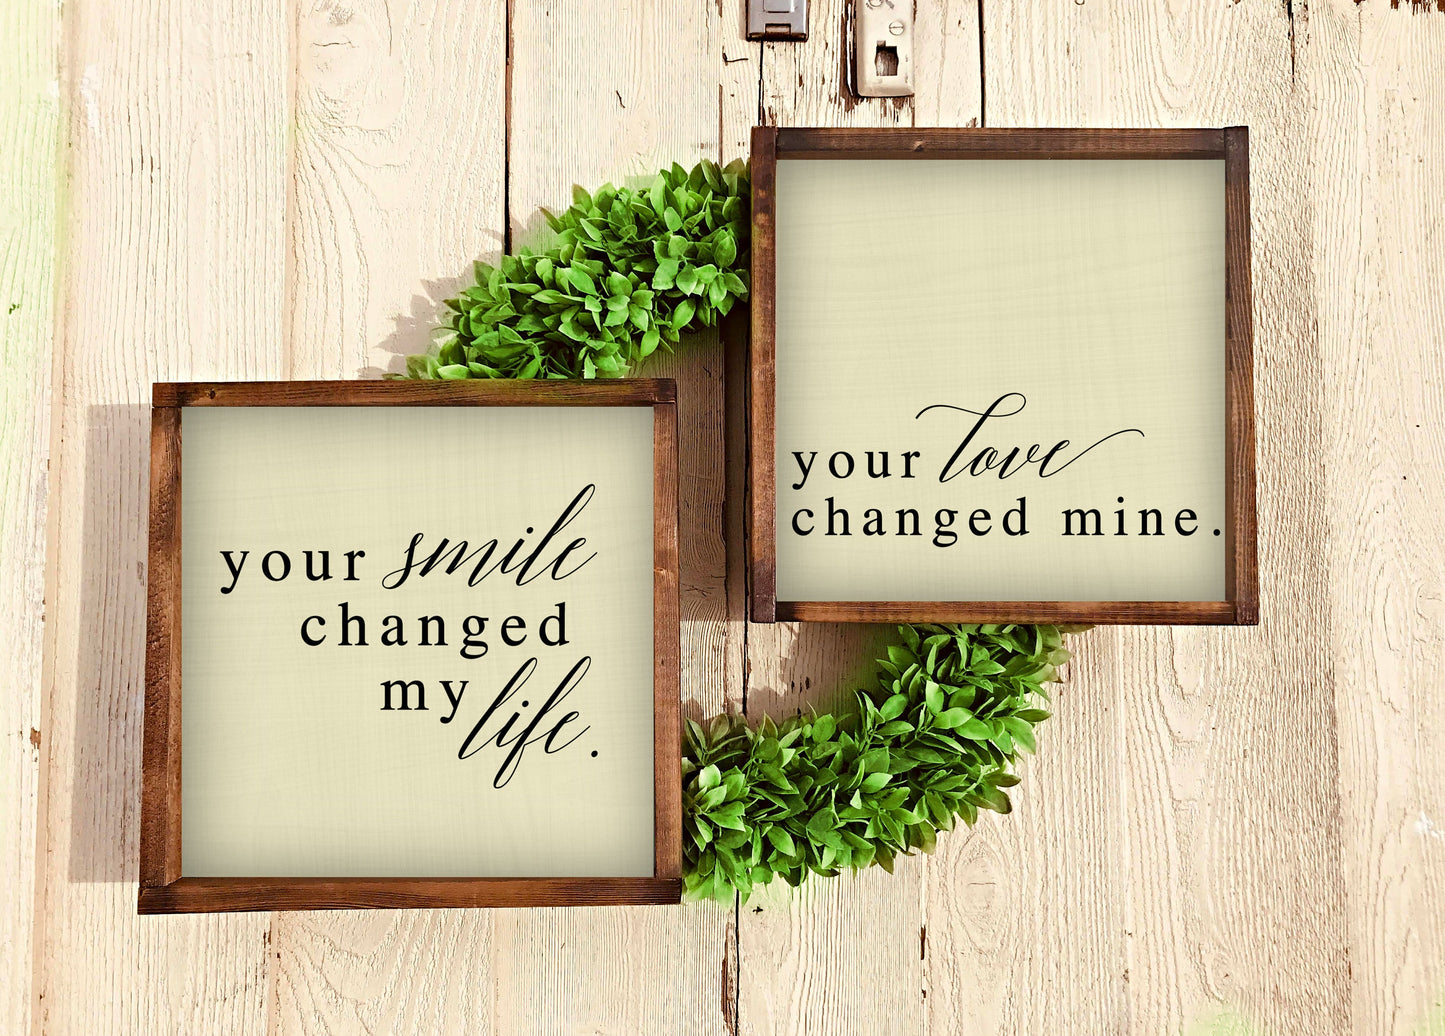 Your smile changed my life - Rustic Wood Framed Mini Sign - Funny Sign Rustic Sign